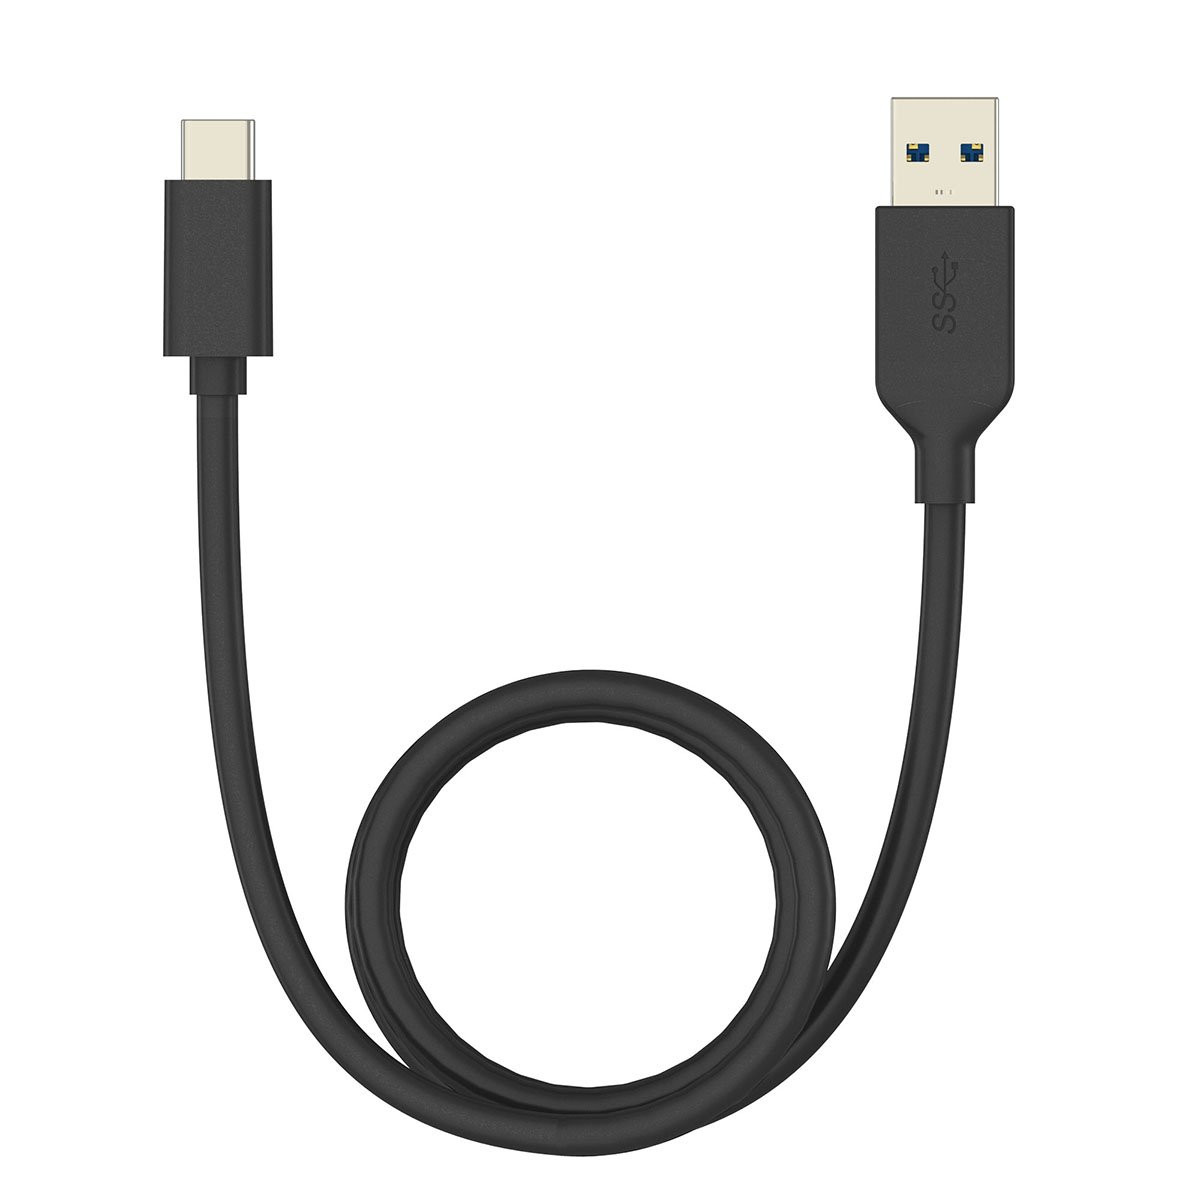 Cable USB 3.0 Tipo C a A